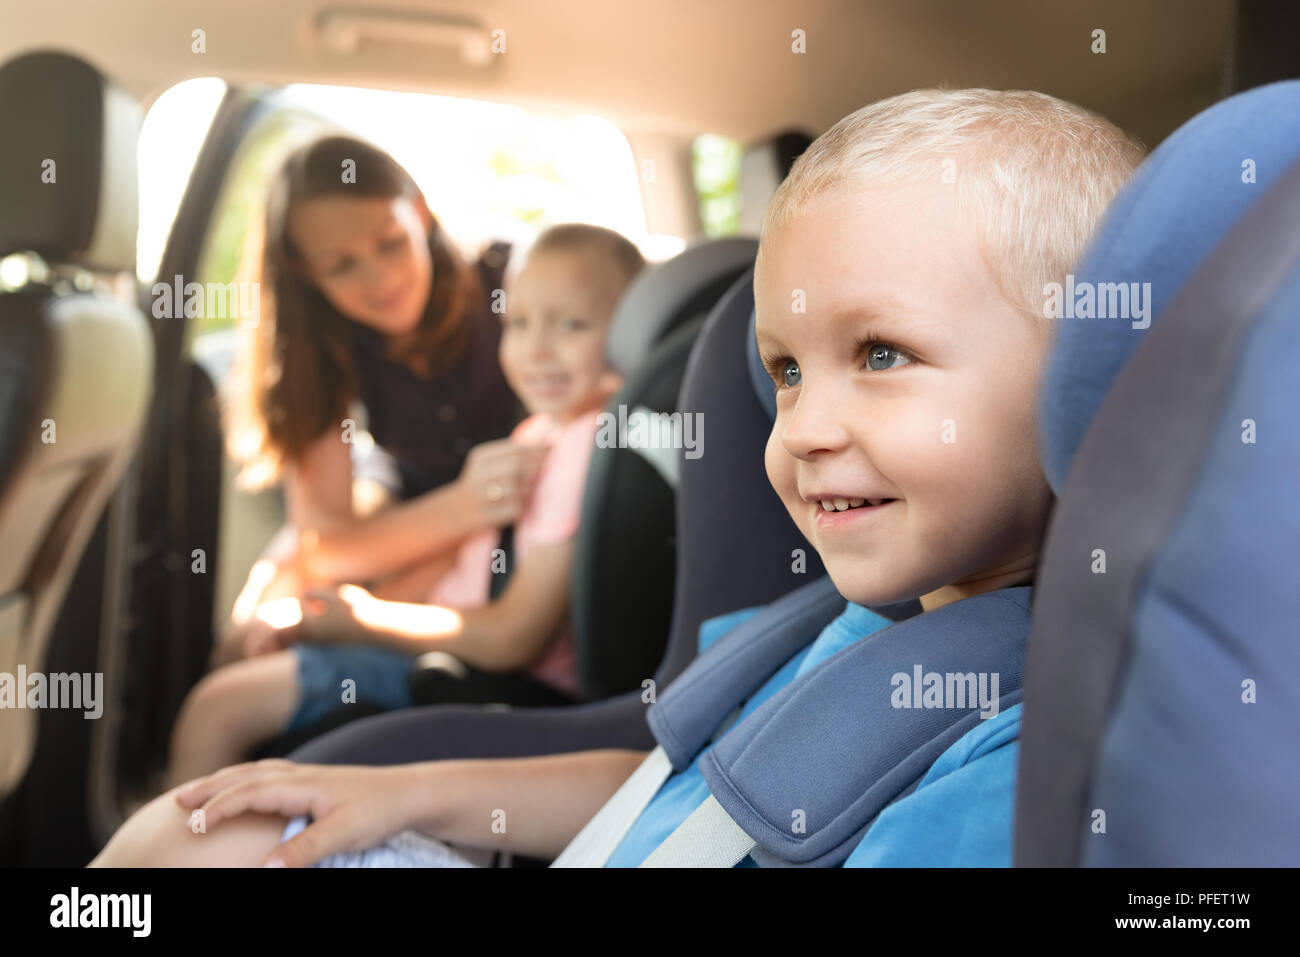 Boys buckled into car seat. Mother takes care about her children in a car. Safe family travel concept Stock Photo